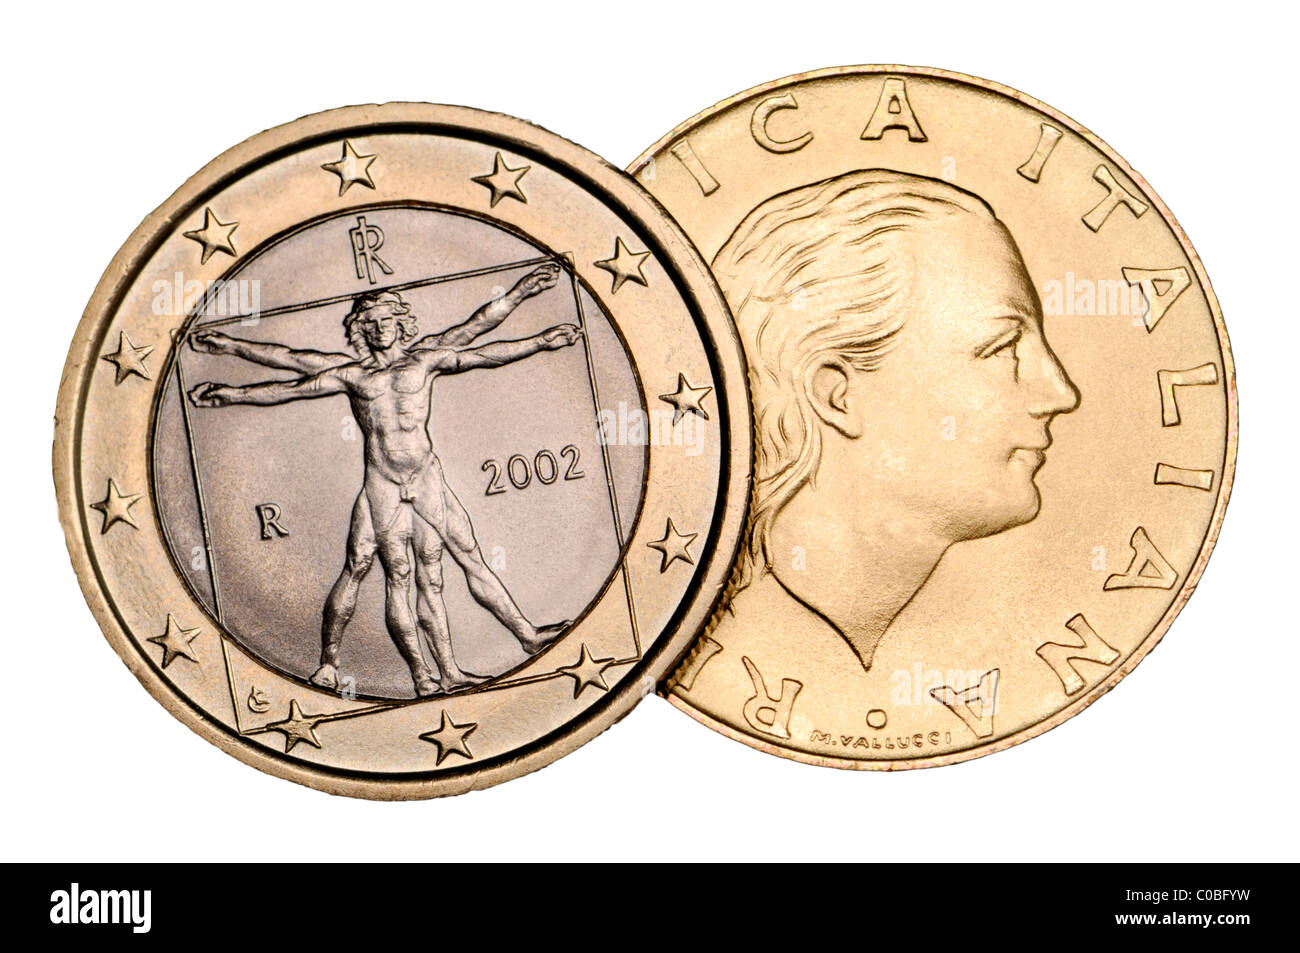 Italian 1 Euro coin from 2002 and 200 Lire coin from 1991 Stock Photo